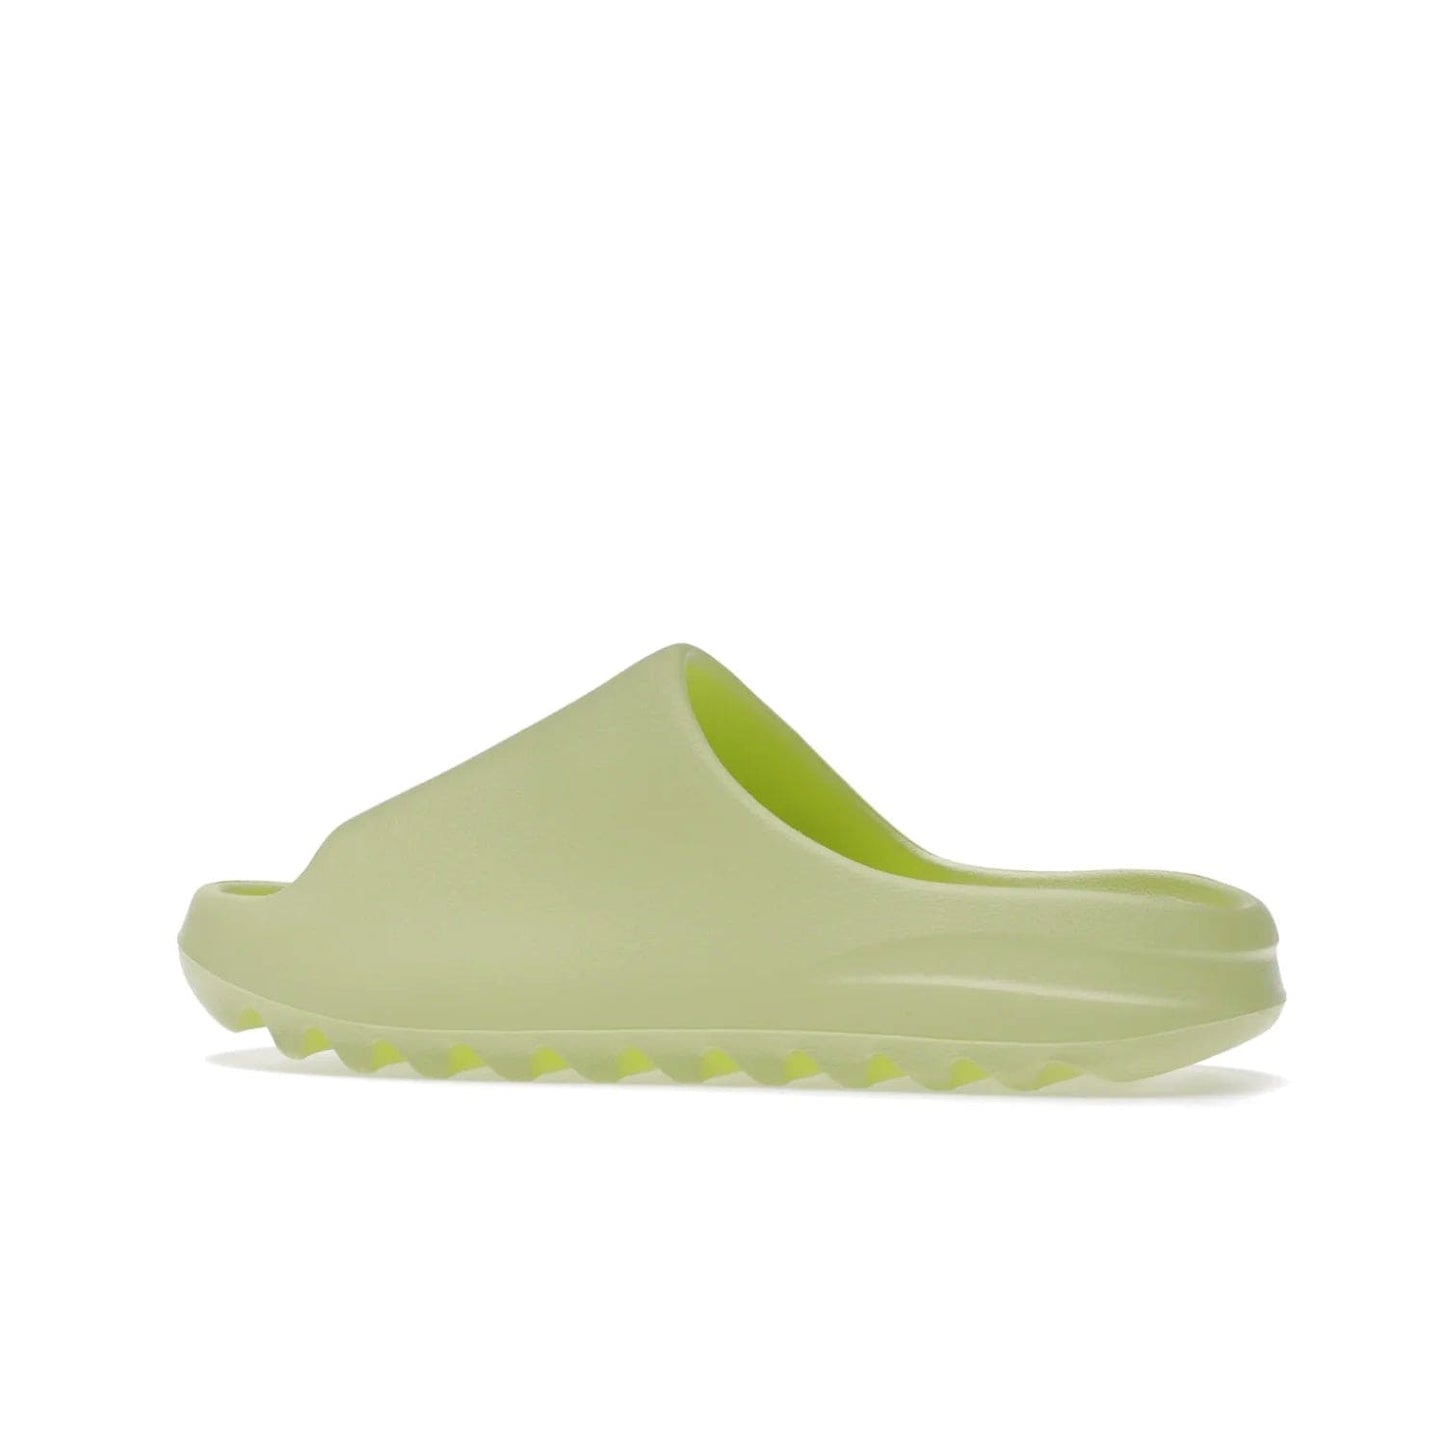 adidas Yeezy Slide Glow Green (2022) (Restock) - Image 21 - Only at www.BallersClubKickz.com - #
Introducing the Adidas Yeezy Slide Glow Green (2022) Restock. Offering ultimate comfort & responsive style with its grooved outsole. Grab your pair on May 2022 for an unforgettable addition to your sneaker collection. US and UK sizes the same.